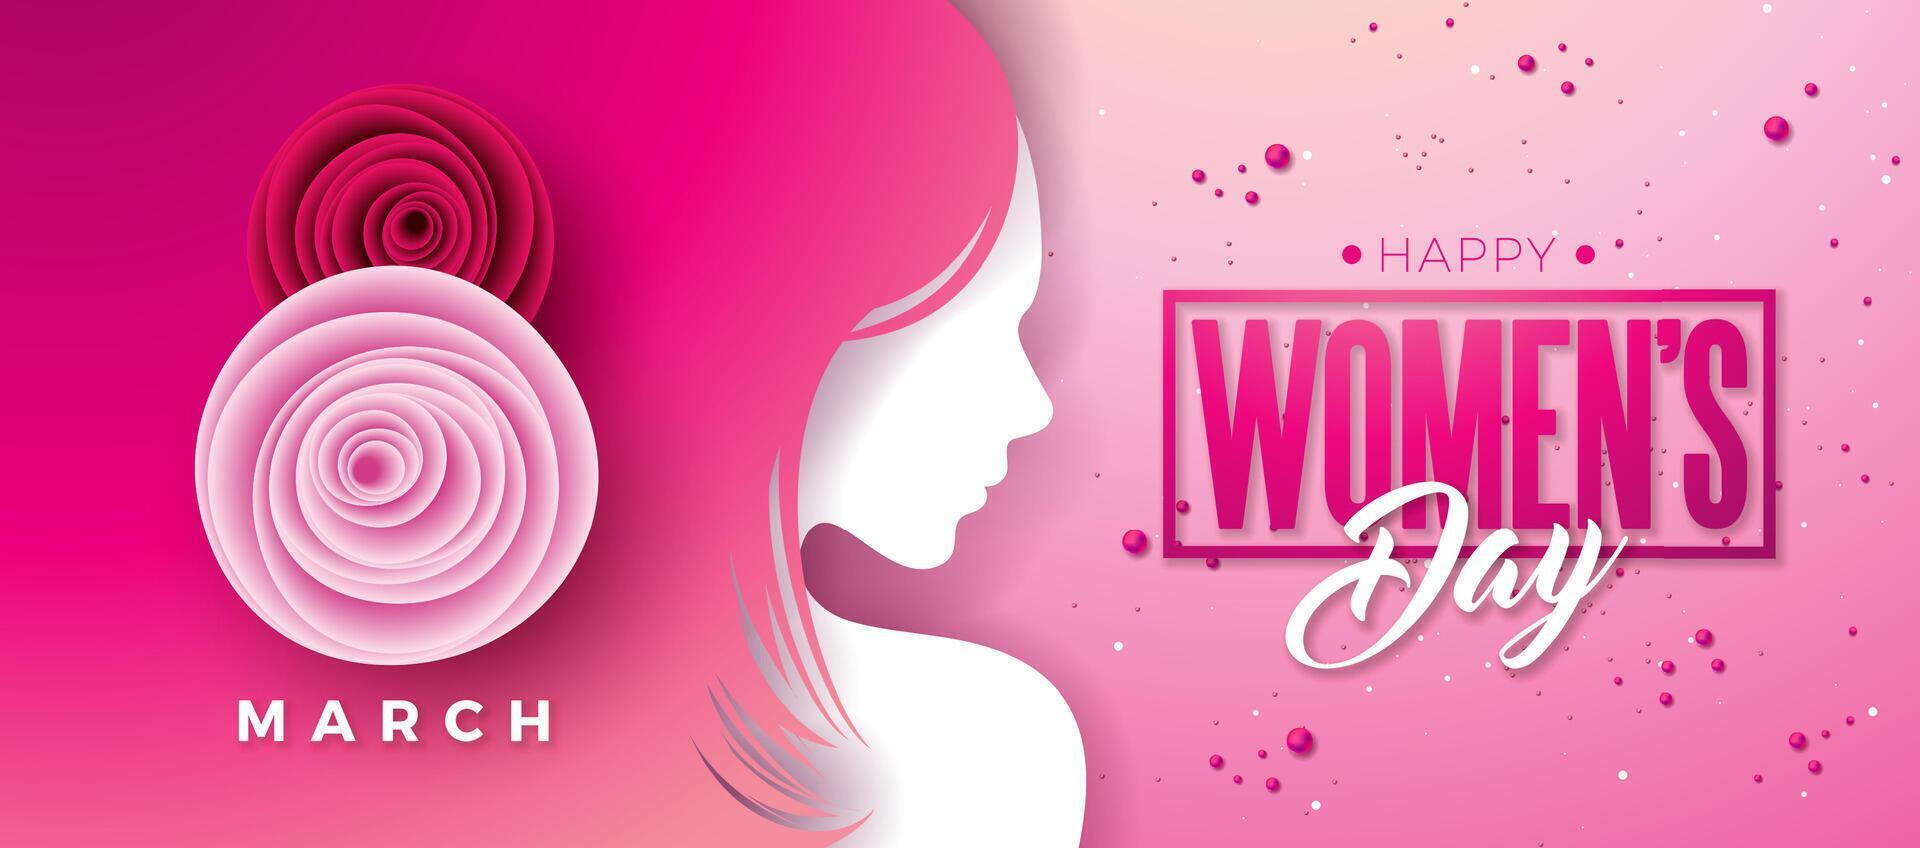 8 March International Women's Day Vector Illustration with Spring Colorful Rose Flower and Young Woman Face Silhouette on Light Pink Background. Women or Mother Day Theme Template for Flyer, Greeting